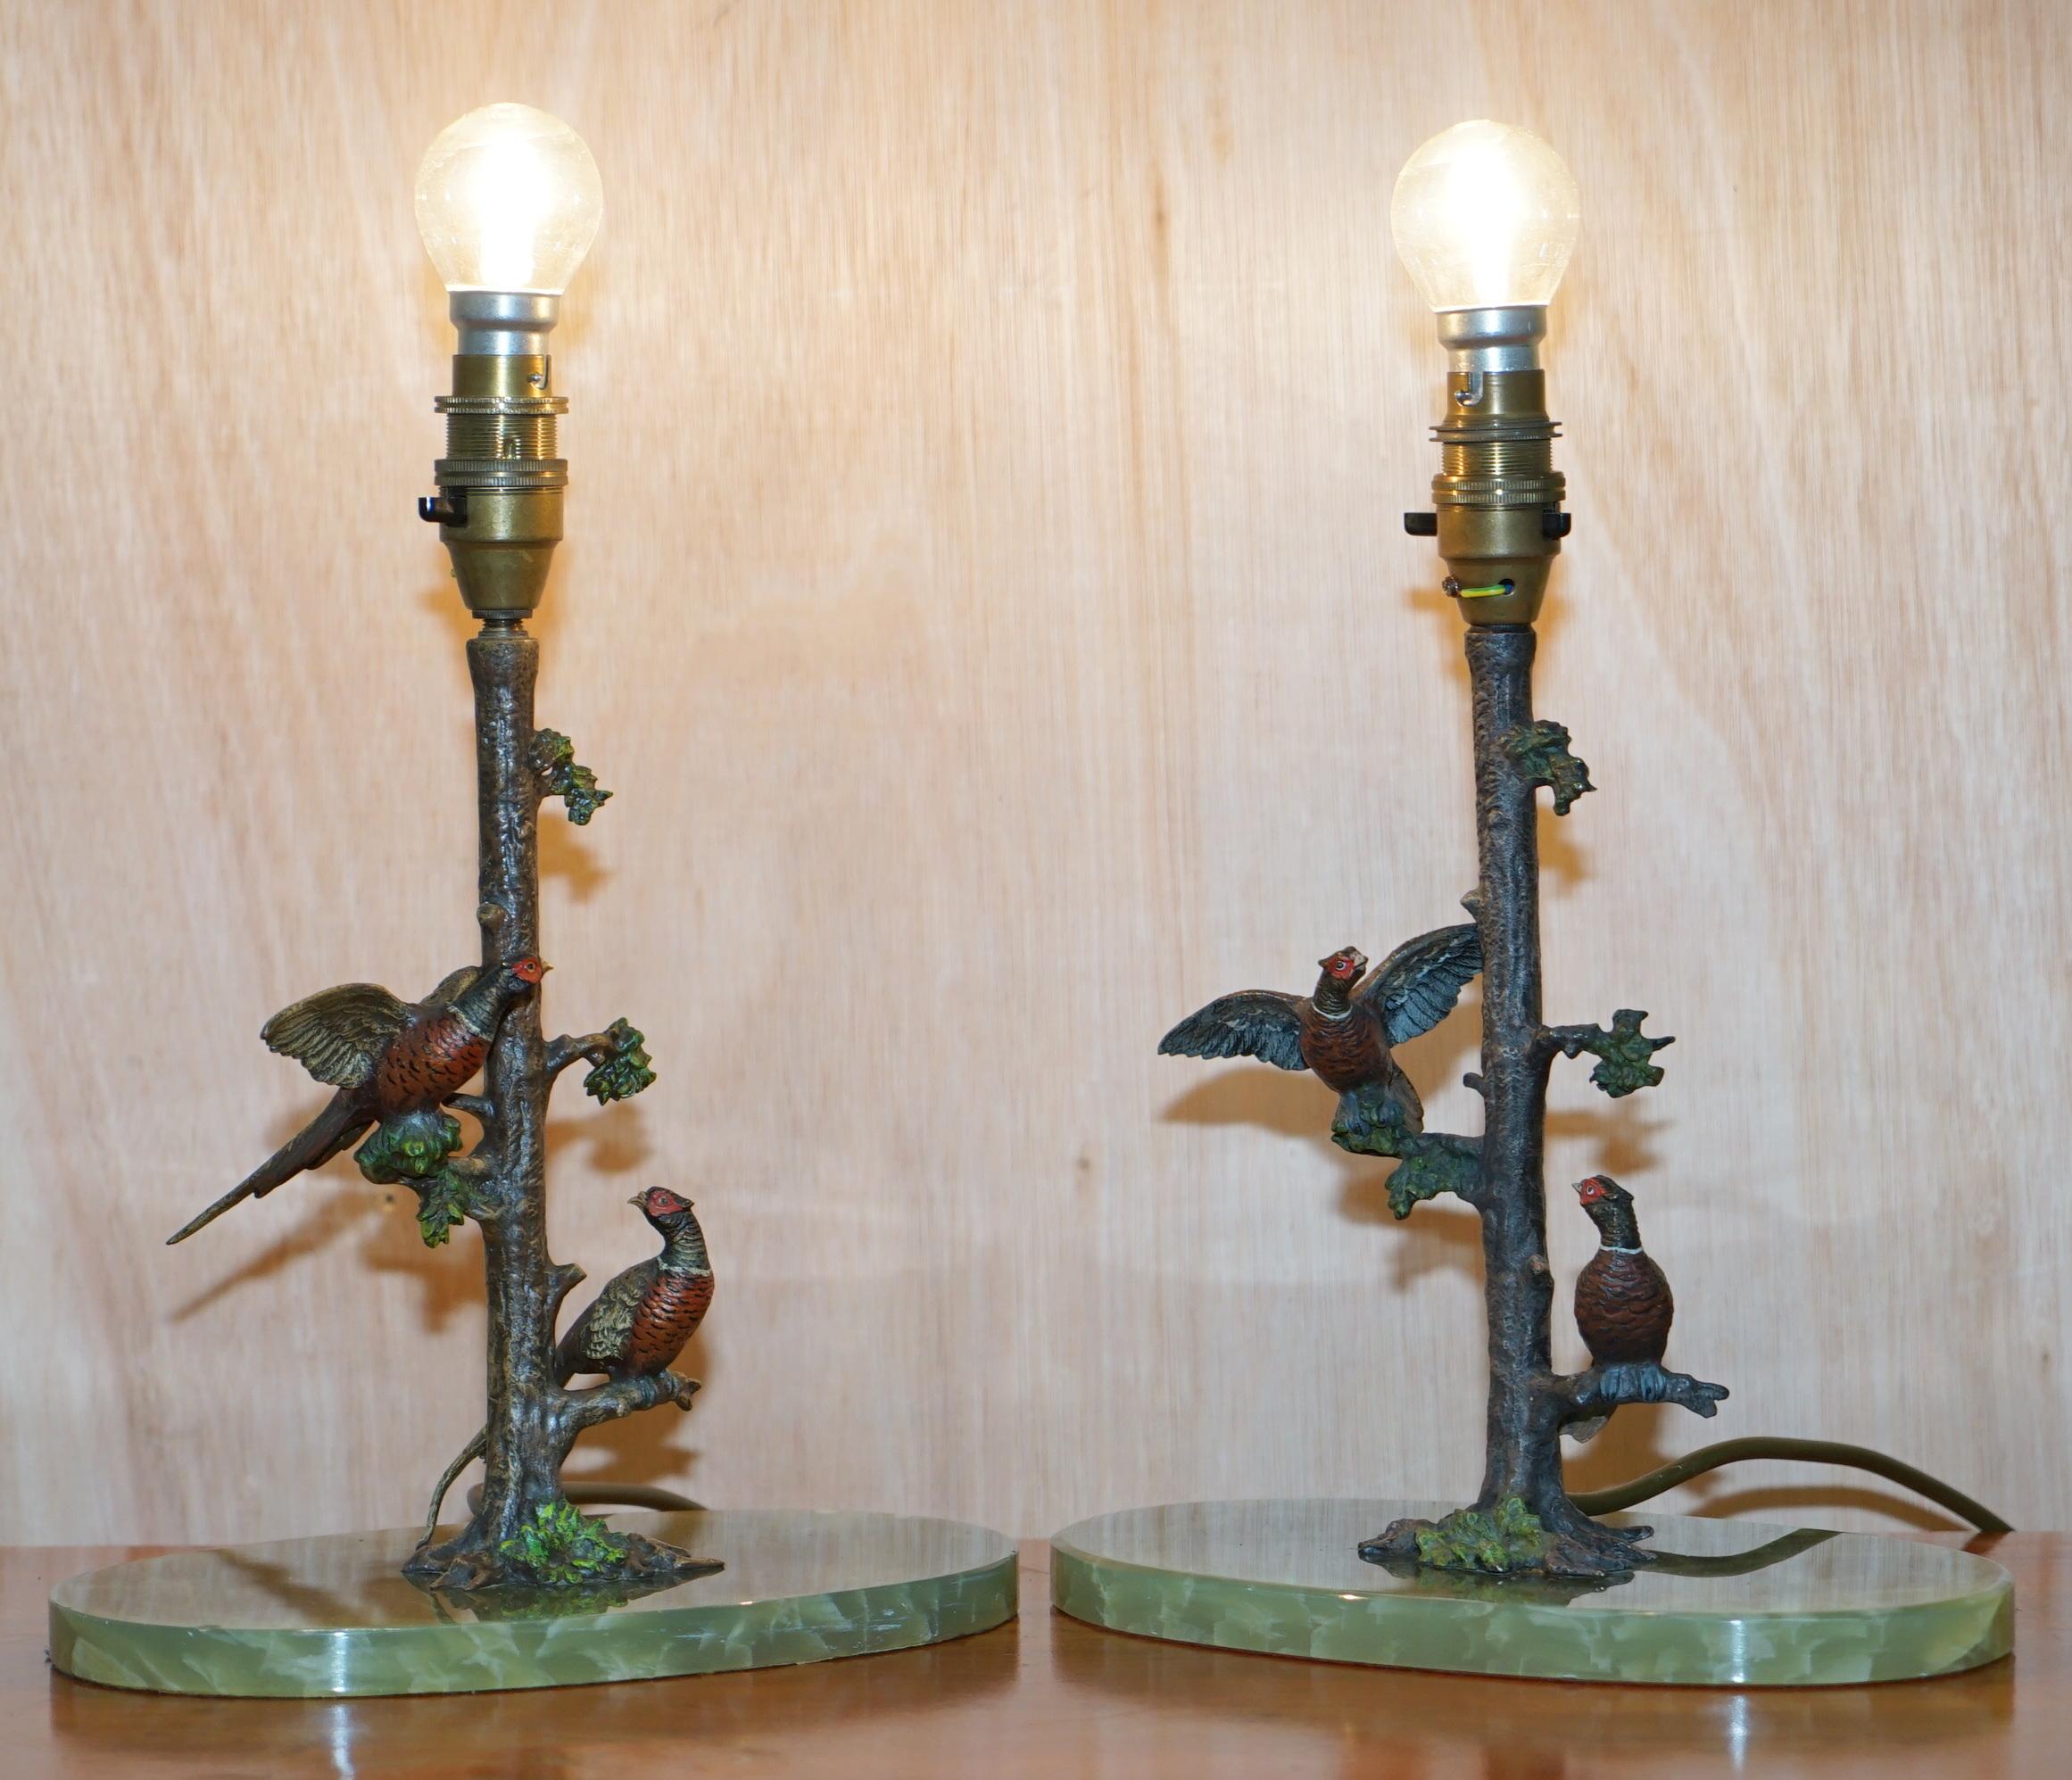 We are delighted to this absolutely stunning pair of circa 1920 cold painted Austrian bronze table lamps of two stunning Pheasants 

I have one more of these lamps which is slightly large and has a pair of blue budgies on it

This pair is